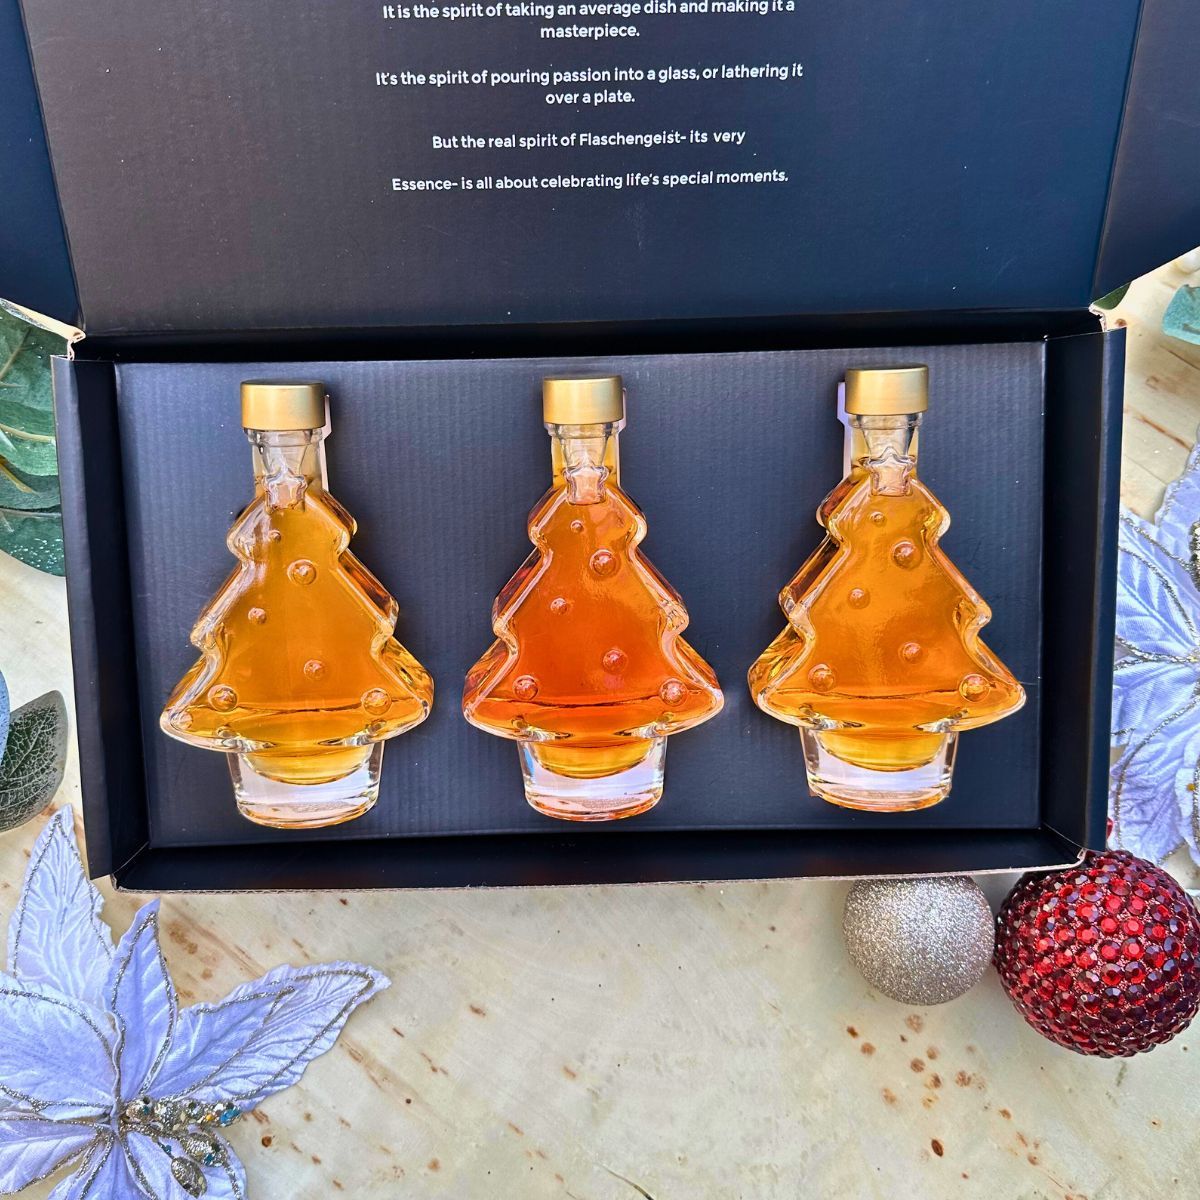 Christmas Tree Bottle Gifts with Spirits